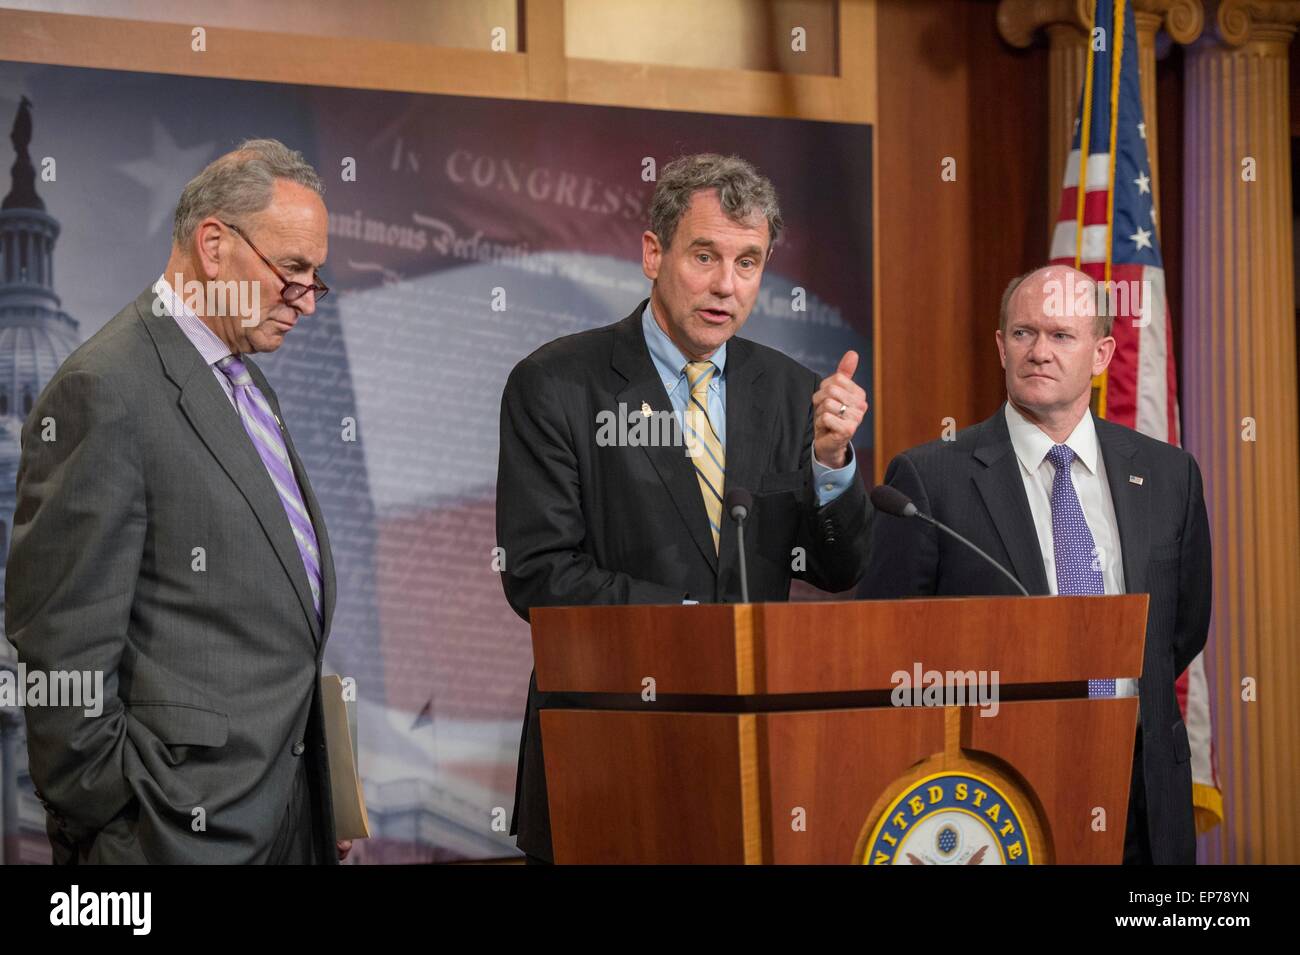 U.S. Democratic Senator Sherrod Brown comments on the trade bill legislation as Senators Chuck Schumer and Chris Coons look on during a press conference May 12, 2015 in Washington, DC. Stock Photo